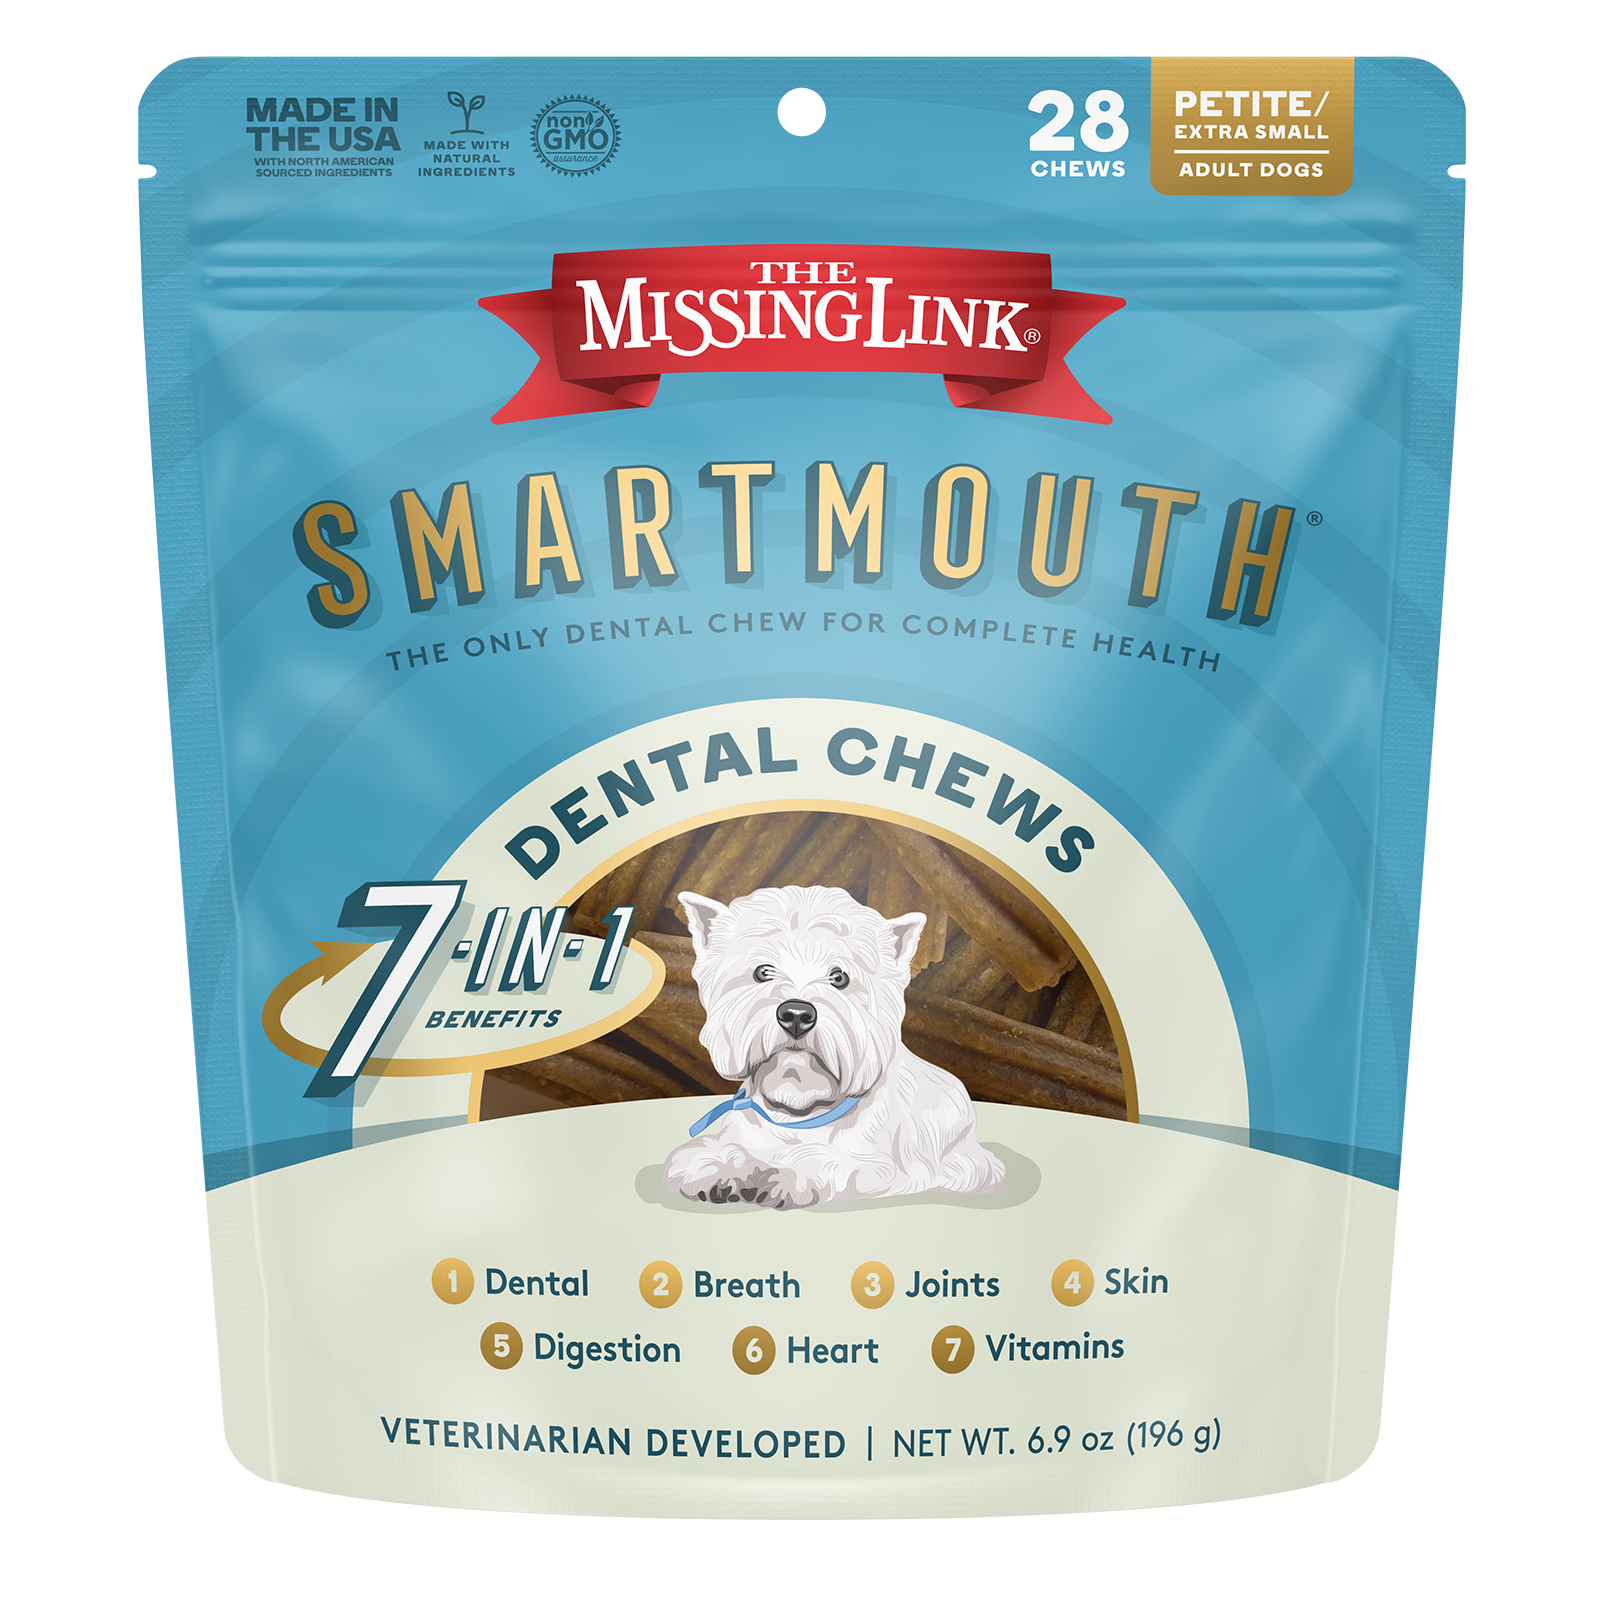 The Missing Link Smartmouth 7 in 1 dental chews, veterinarian developed.  Petite / Extra small dog size.